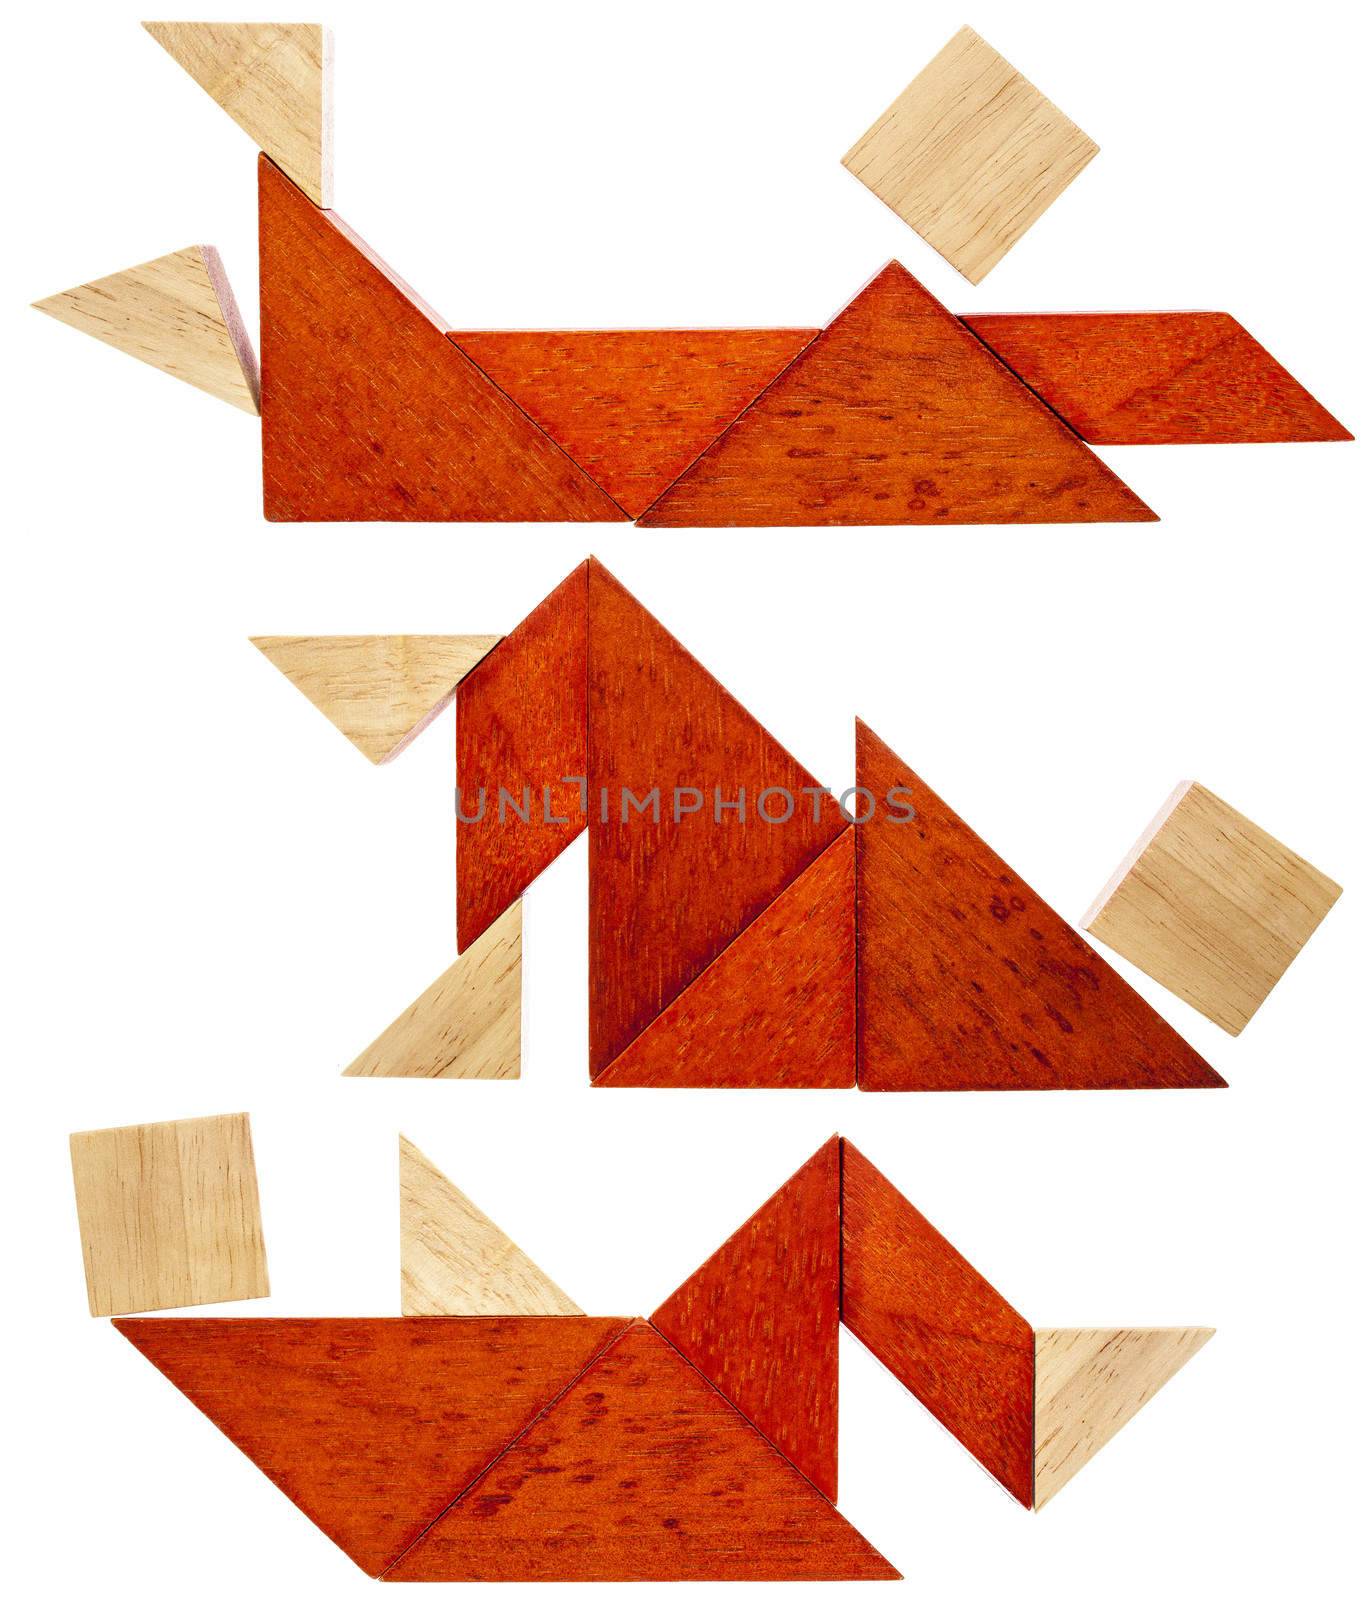 three abstract figures lying down and resting  built from seven tangram wooden pieces, a traditional Chinese puzzle game